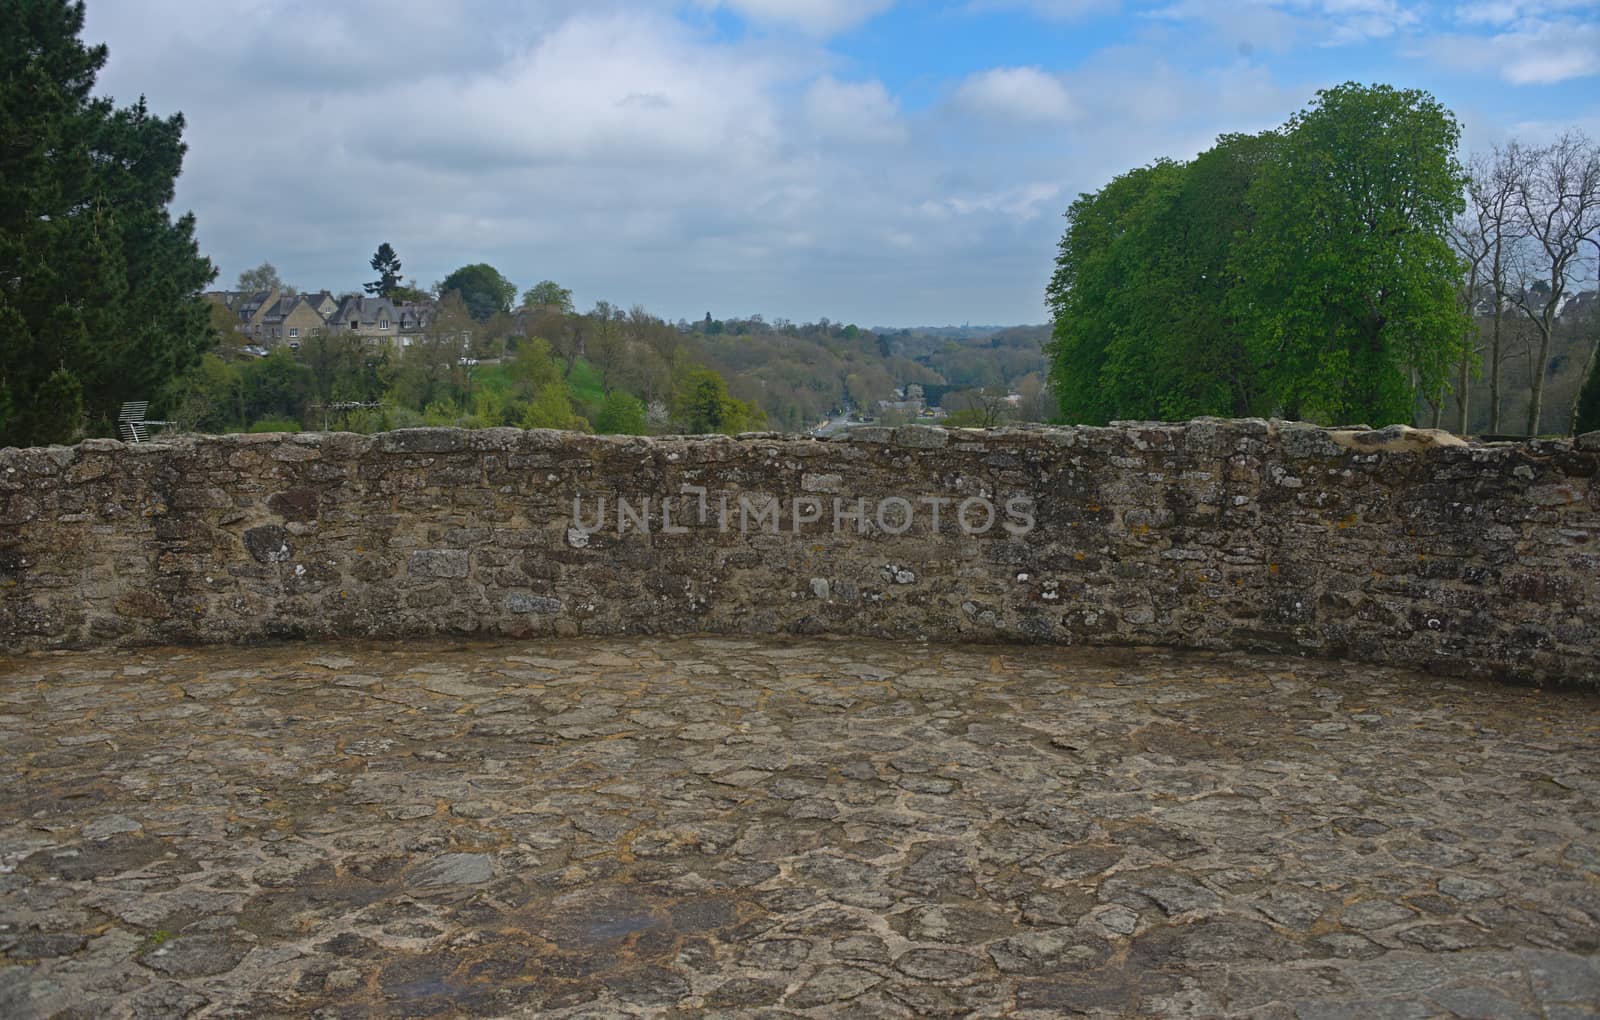 Top of stone fortress tower and landscape behind it in Dinan, France by sheriffkule